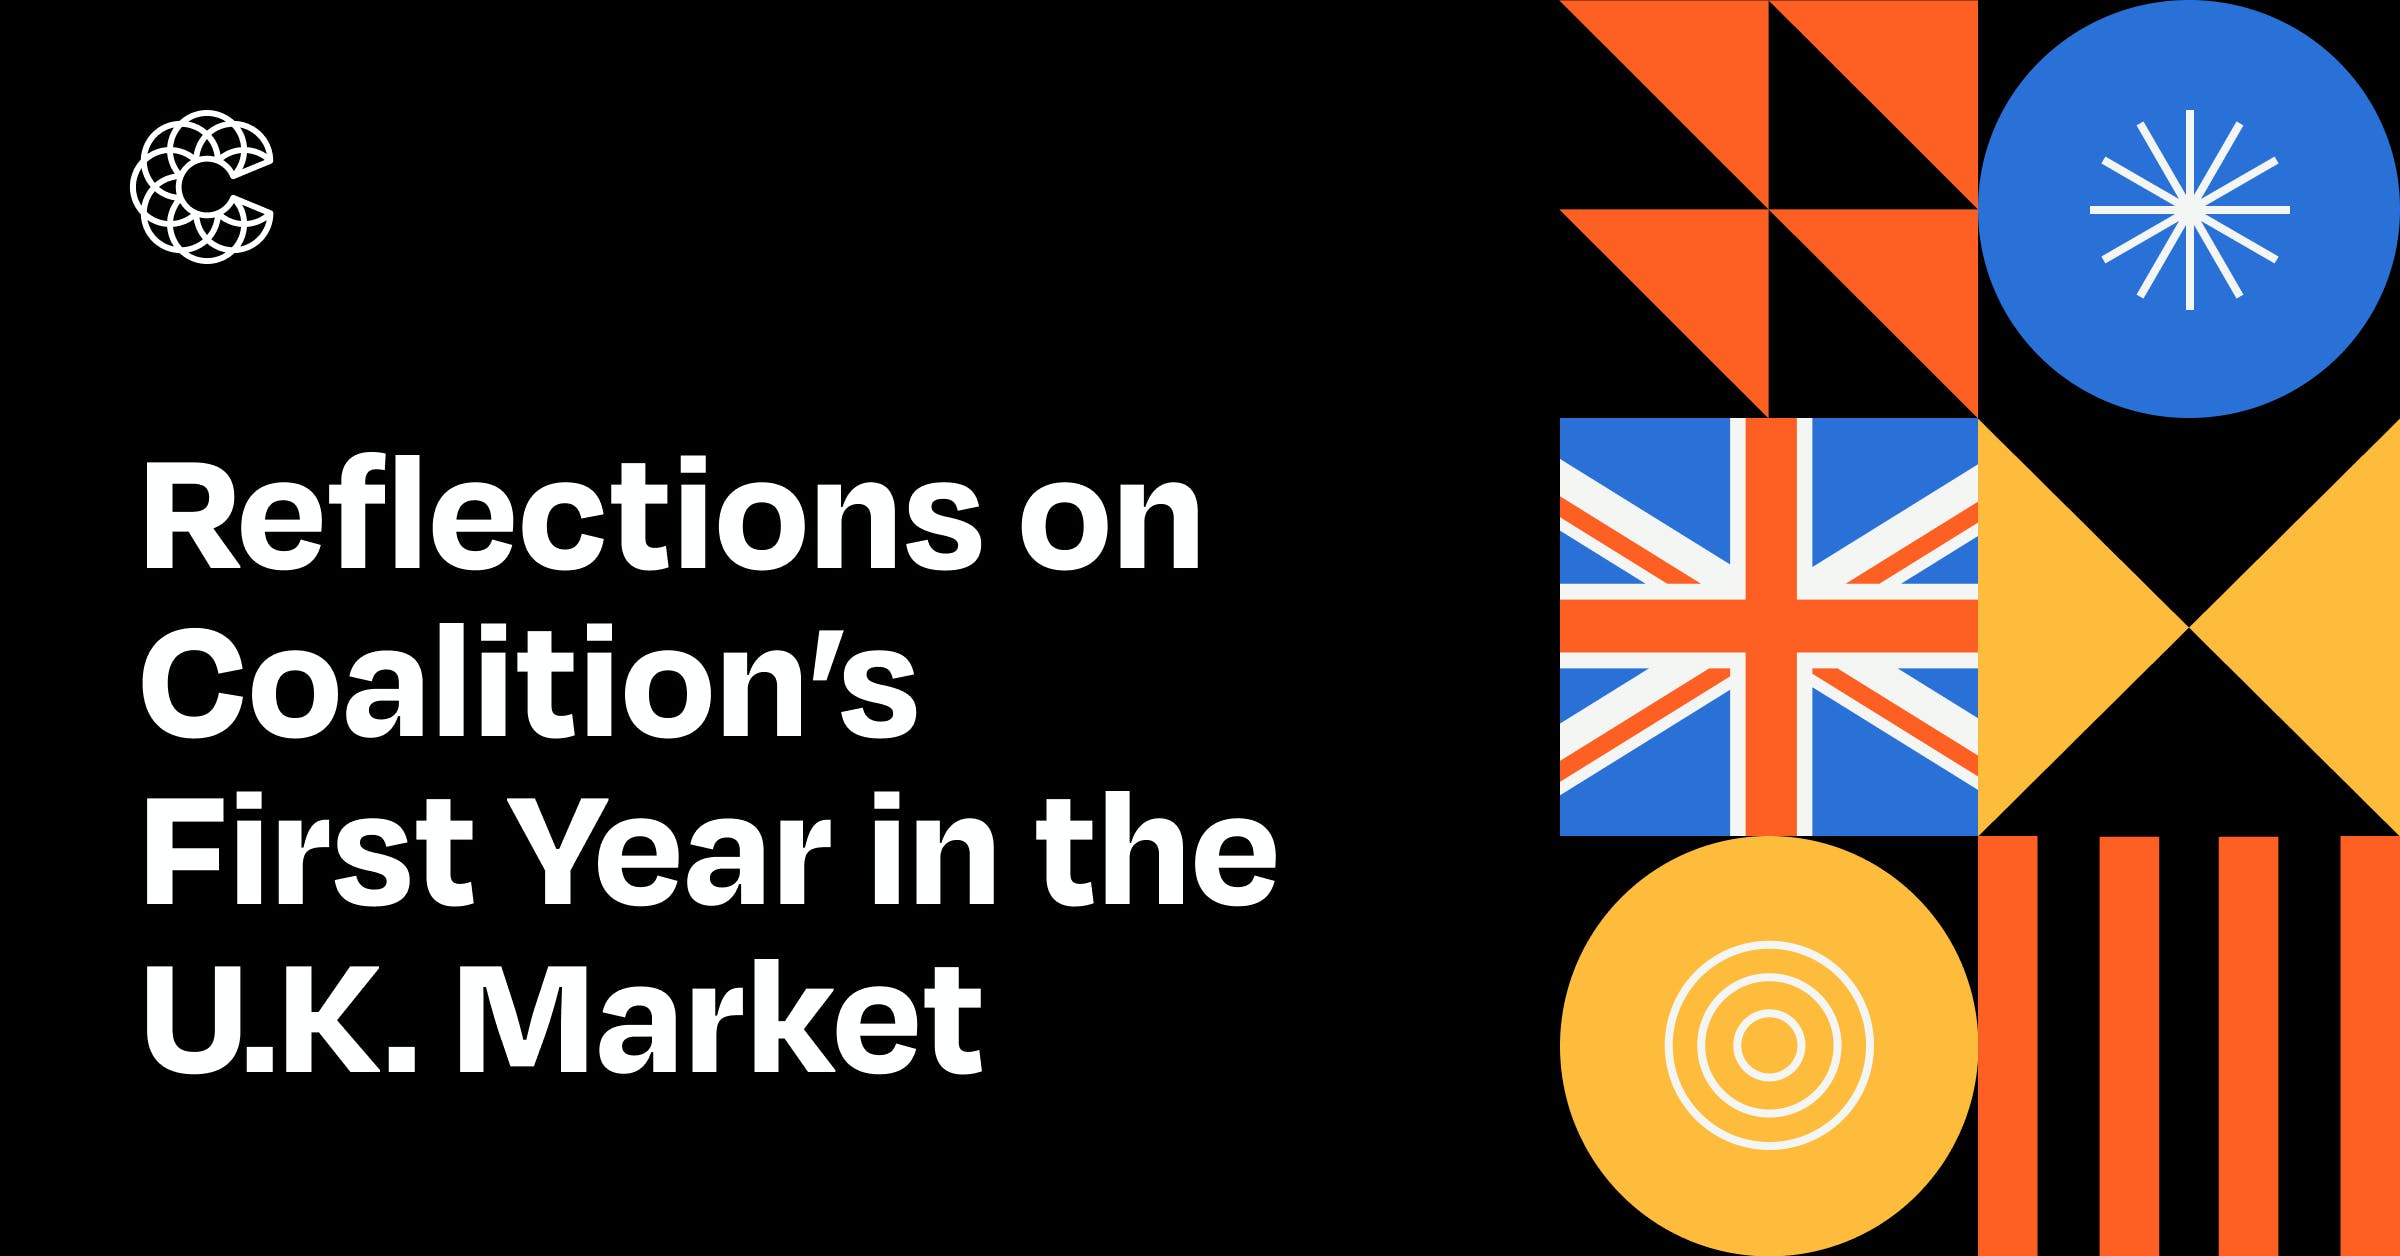 Coalition Blog: Reflections on Coalition’s First Year in the U.K. Market